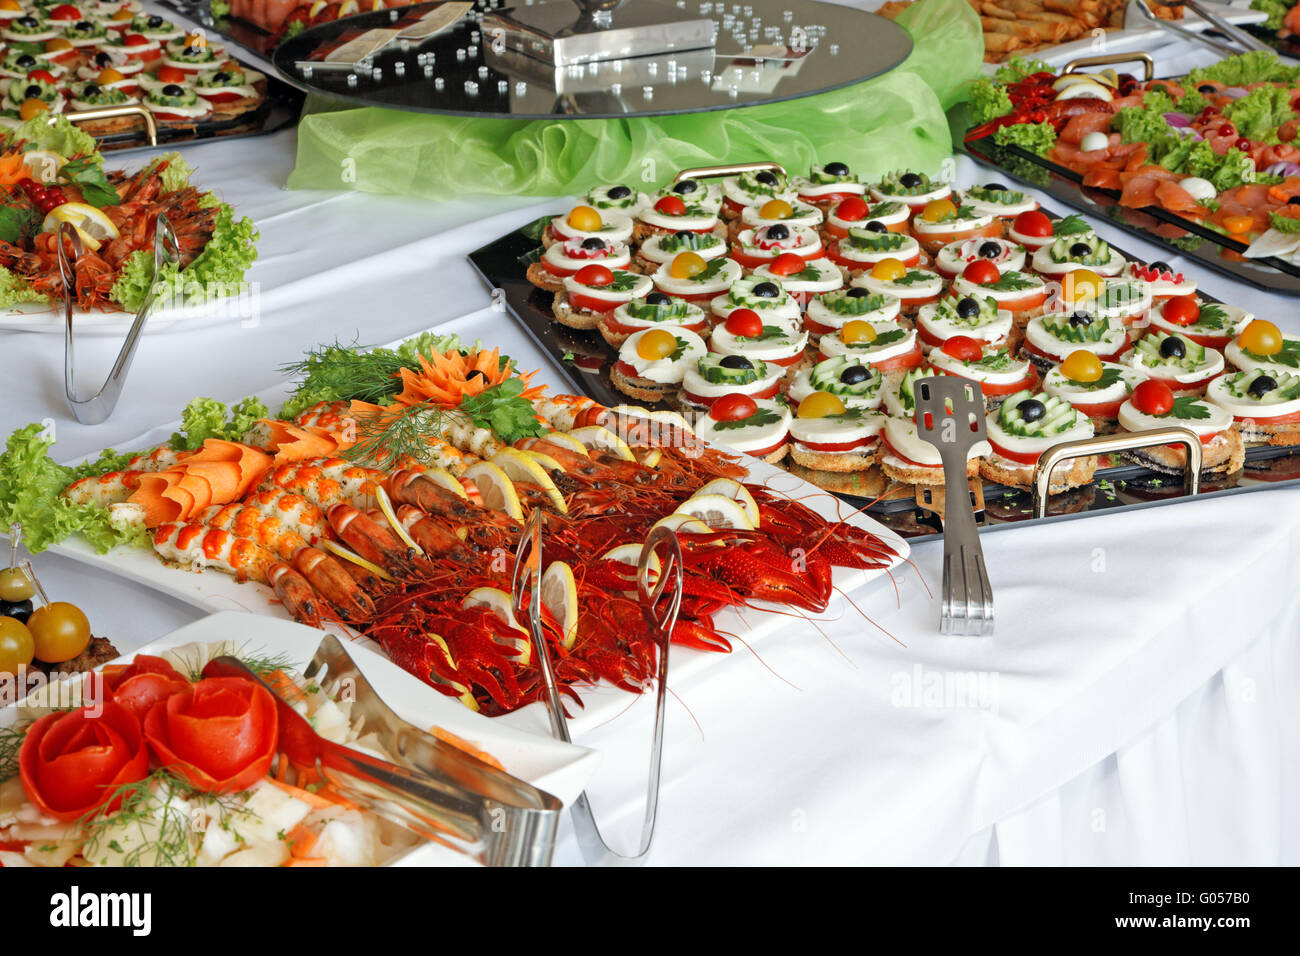 Cold buffet. Stock Photo